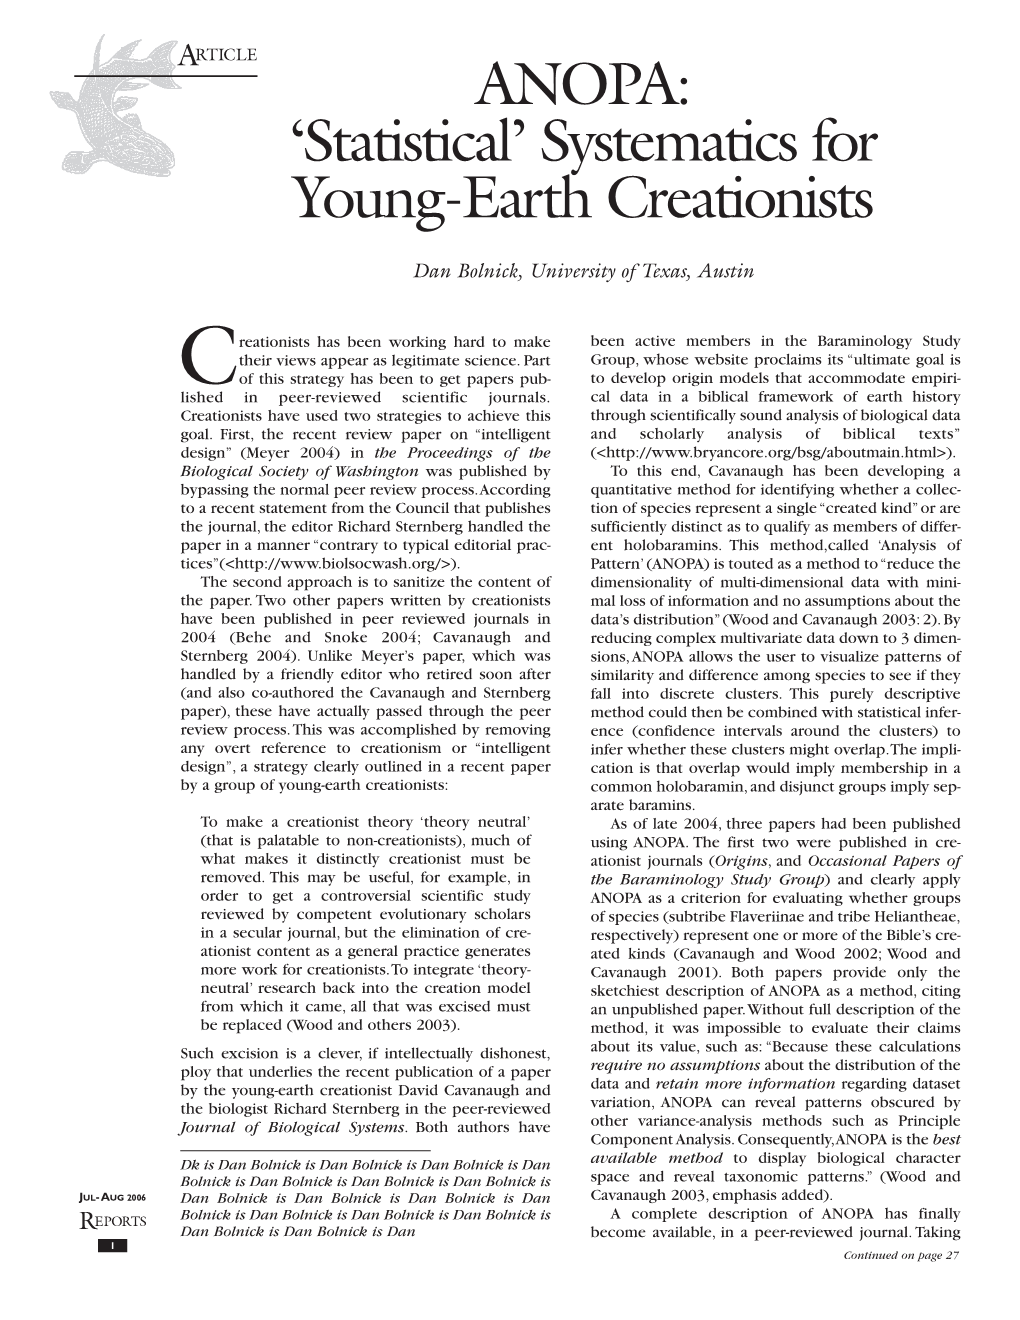 ANOPA: 'Statistical' Systematics for Young-Earth Creationists